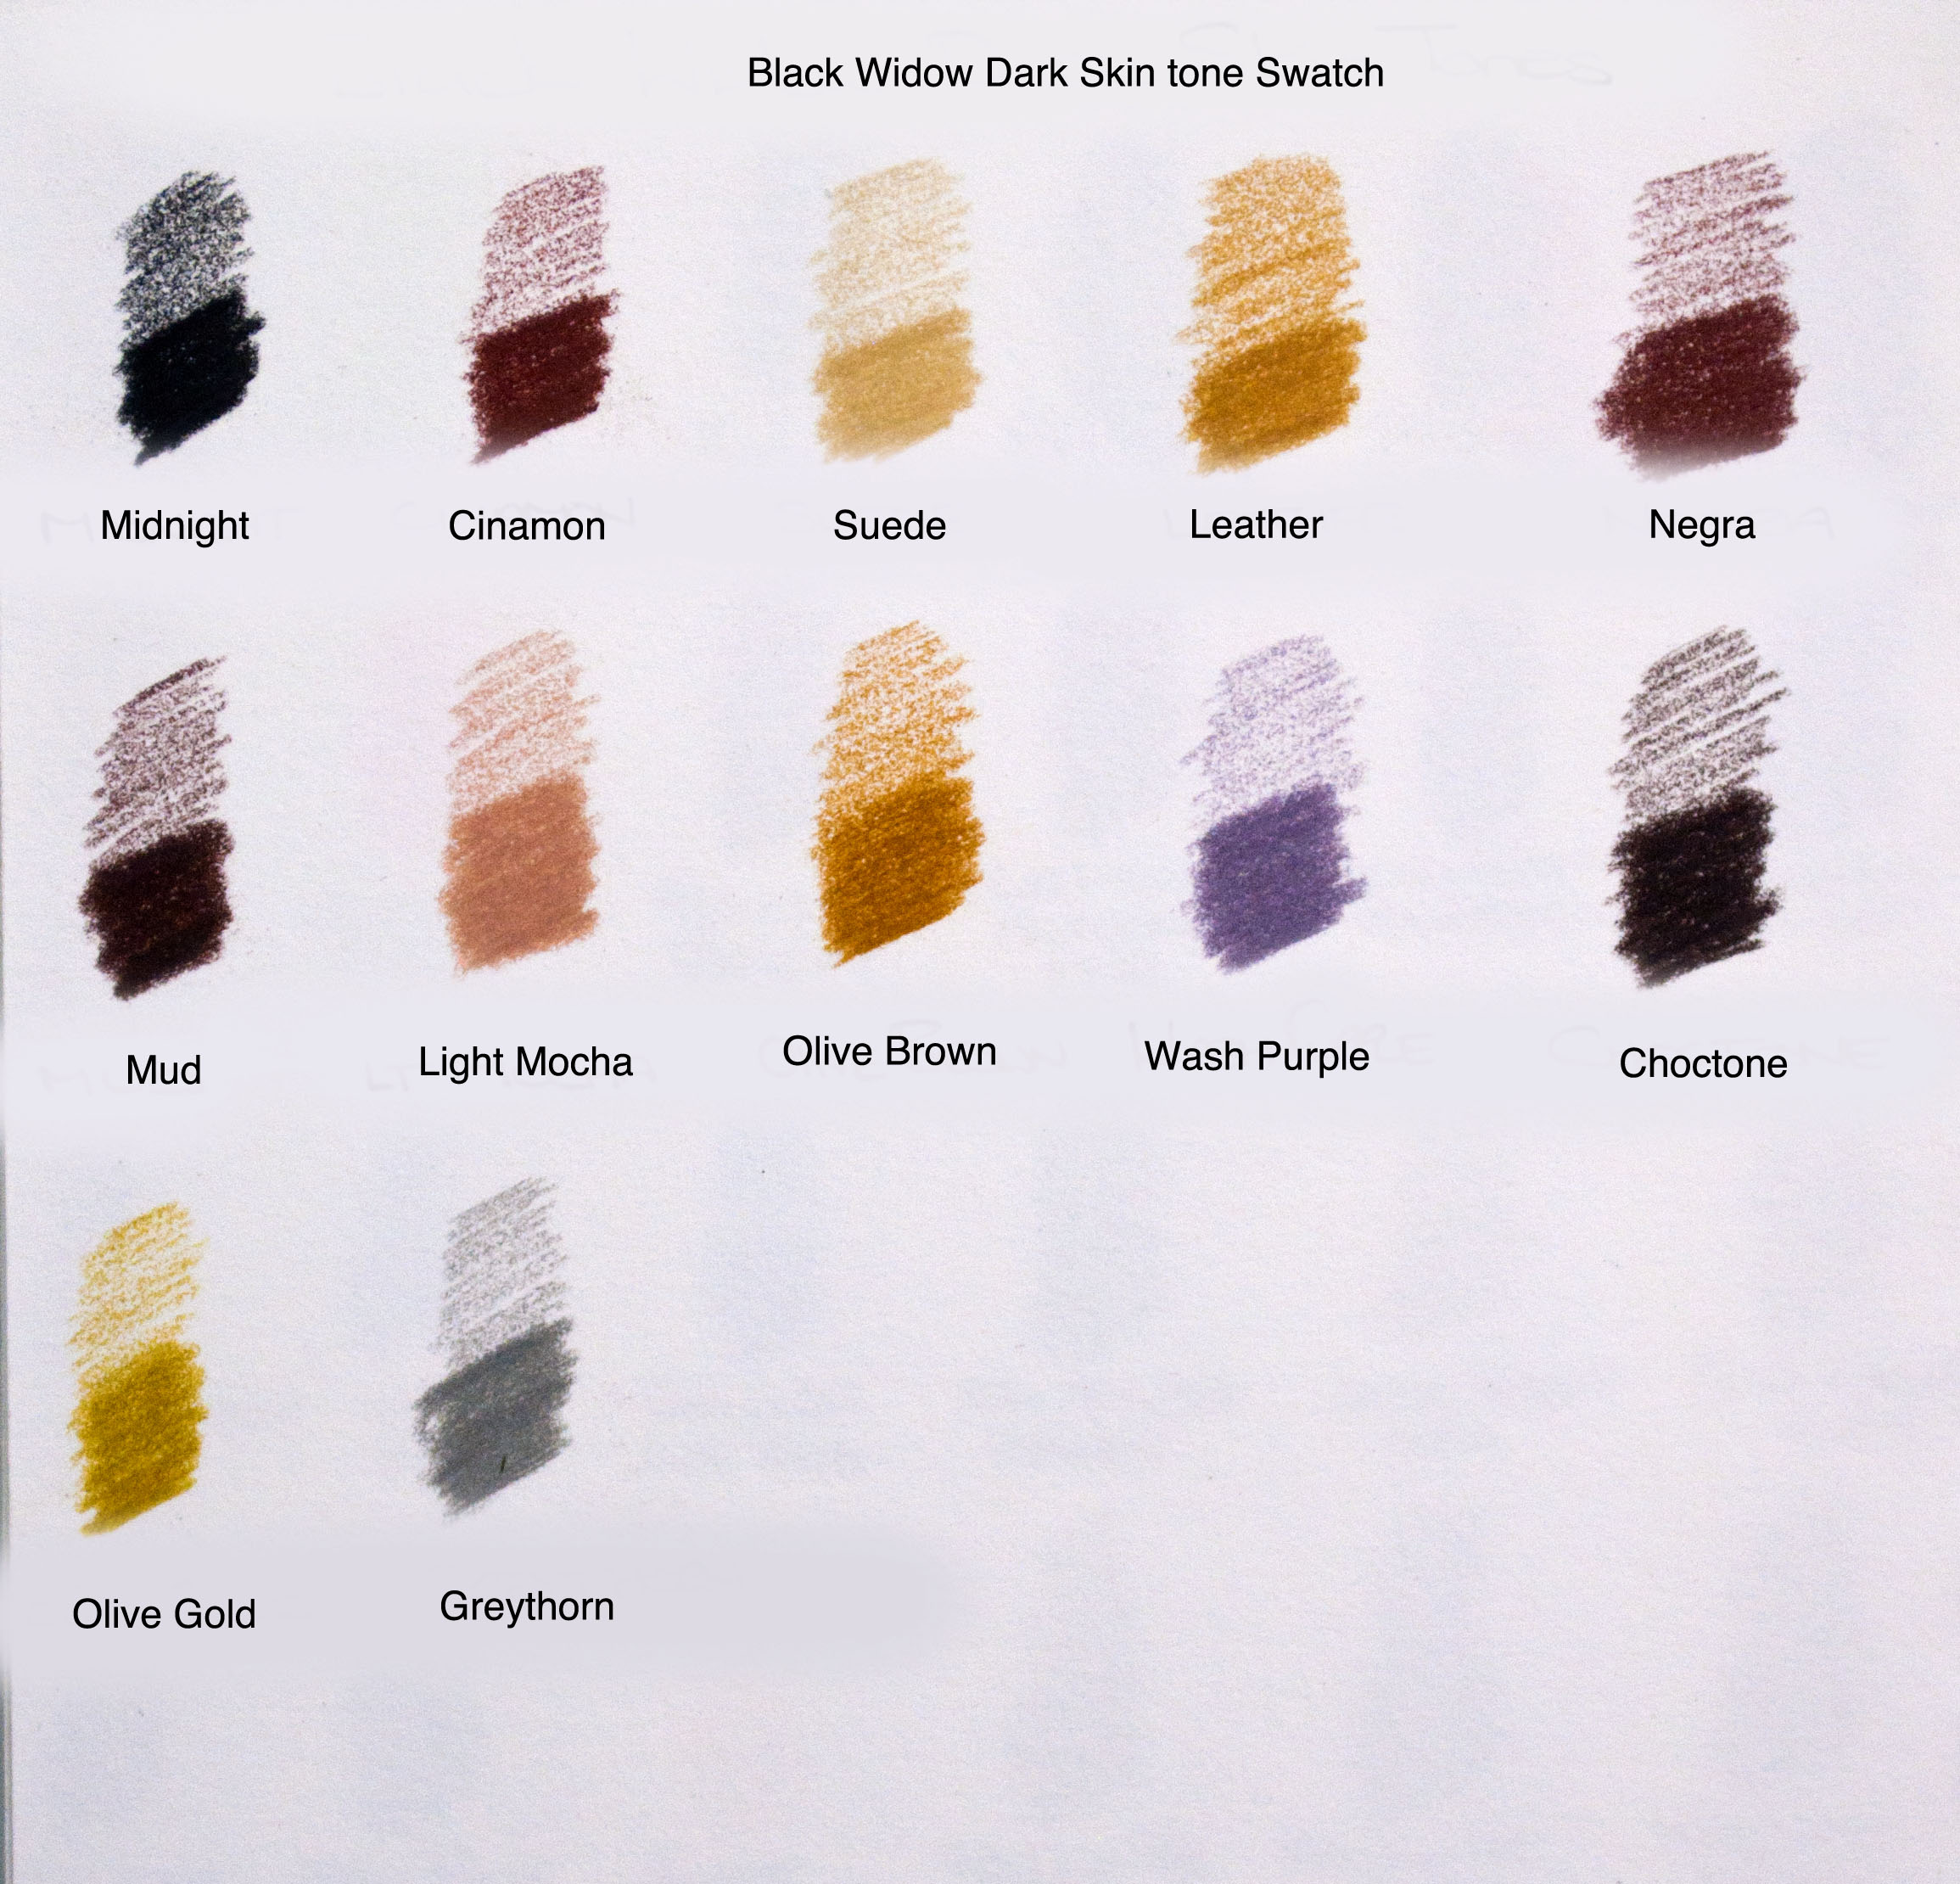 Master SKIN TONES with colored pencils